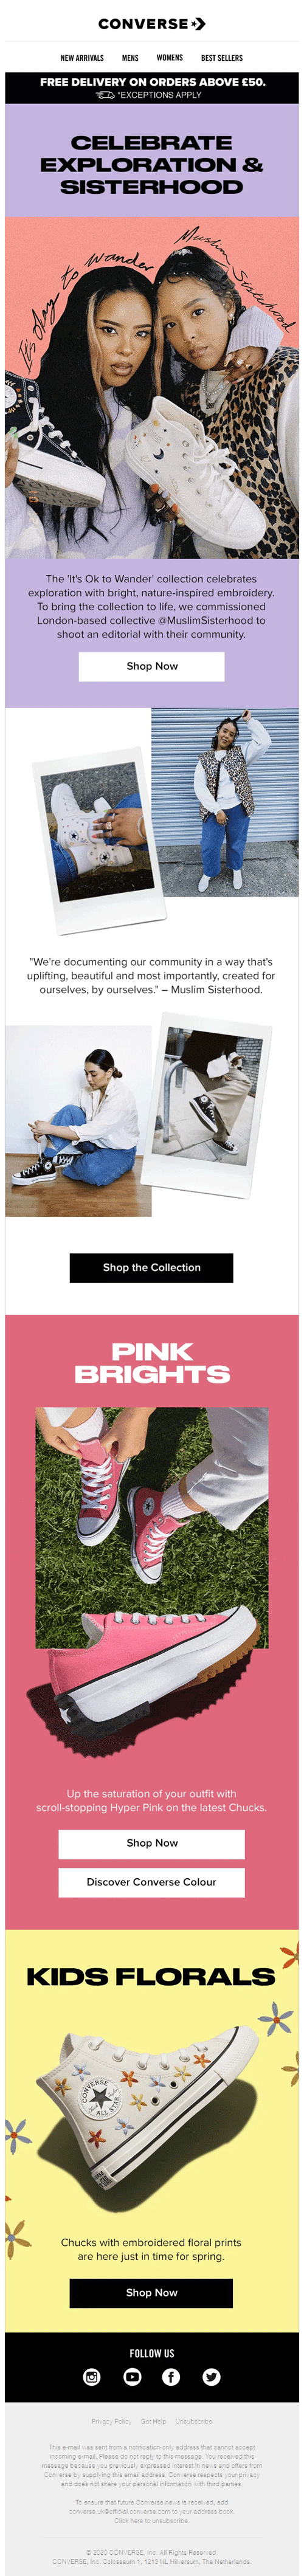 Converse - Women's Day email